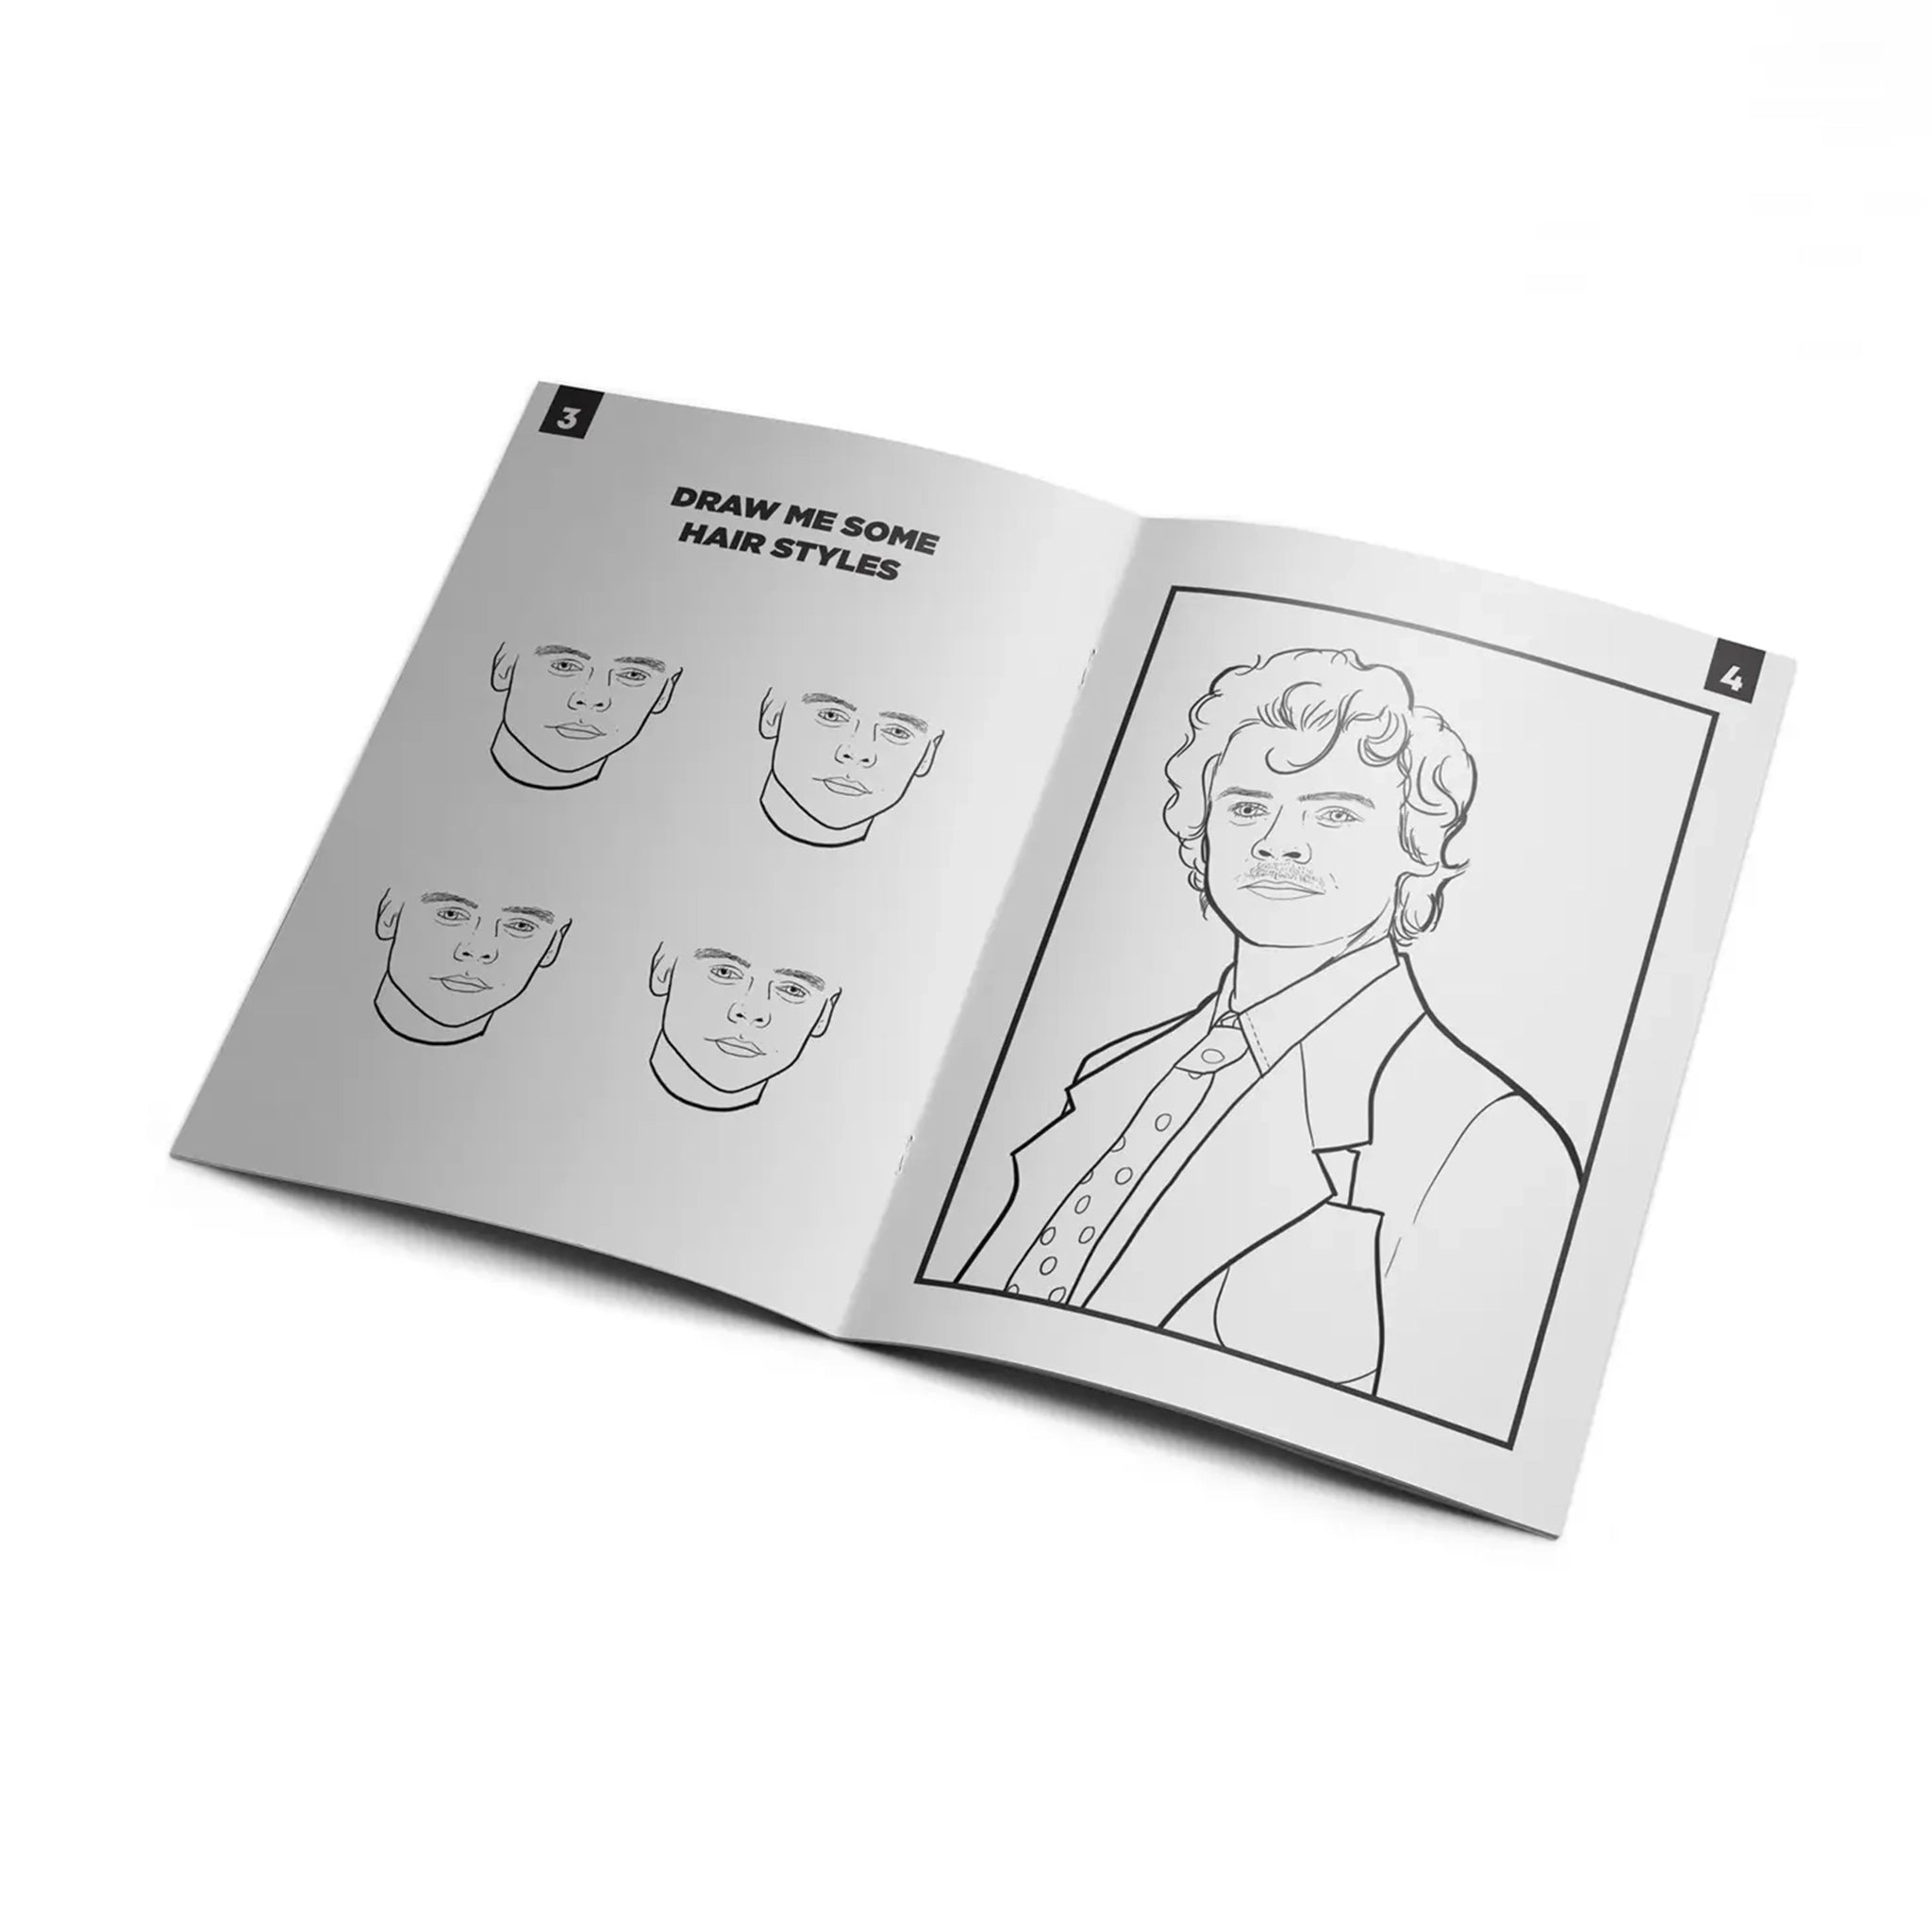 Another page inside the book that has an illustration of Harry Styles meant for coloring as well as an activity on the other side that says, &quot;Draw me some harry styles&quot; along with blank faces meant for drawing in facial hair, head hair, etc. 